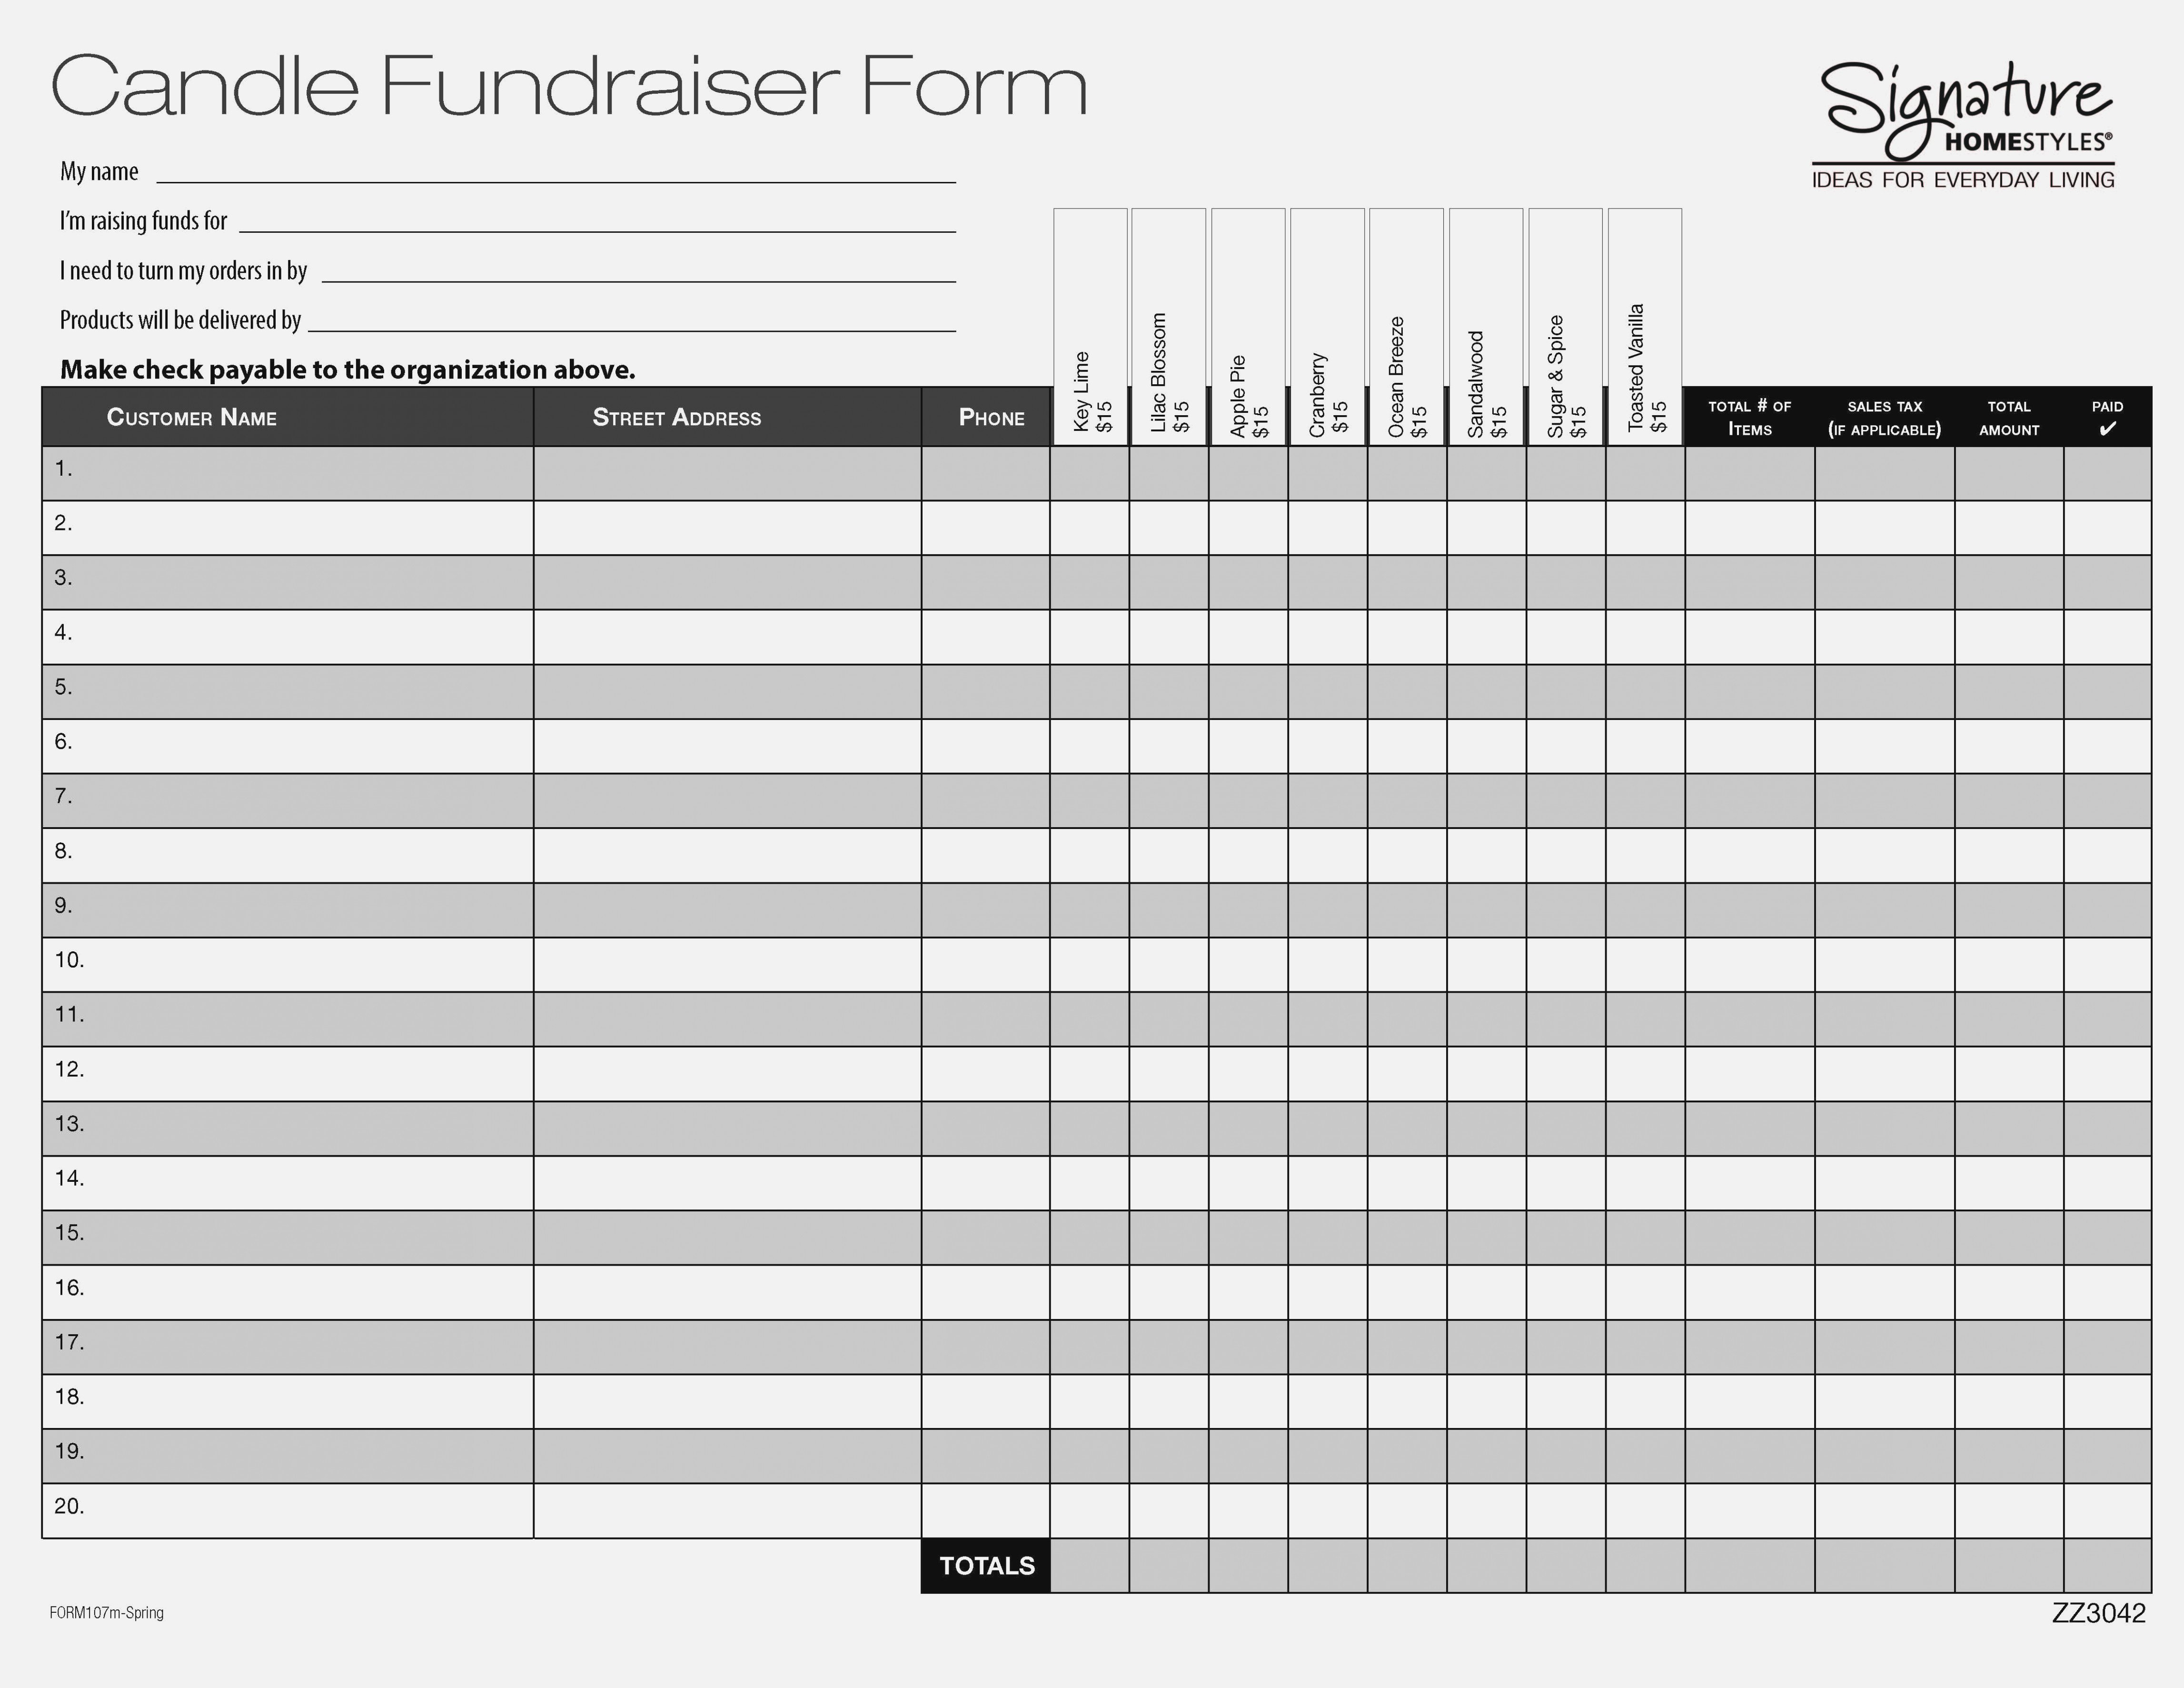 Fundraising order form Templates 12 Ideas to organize Your Own Fundraiser